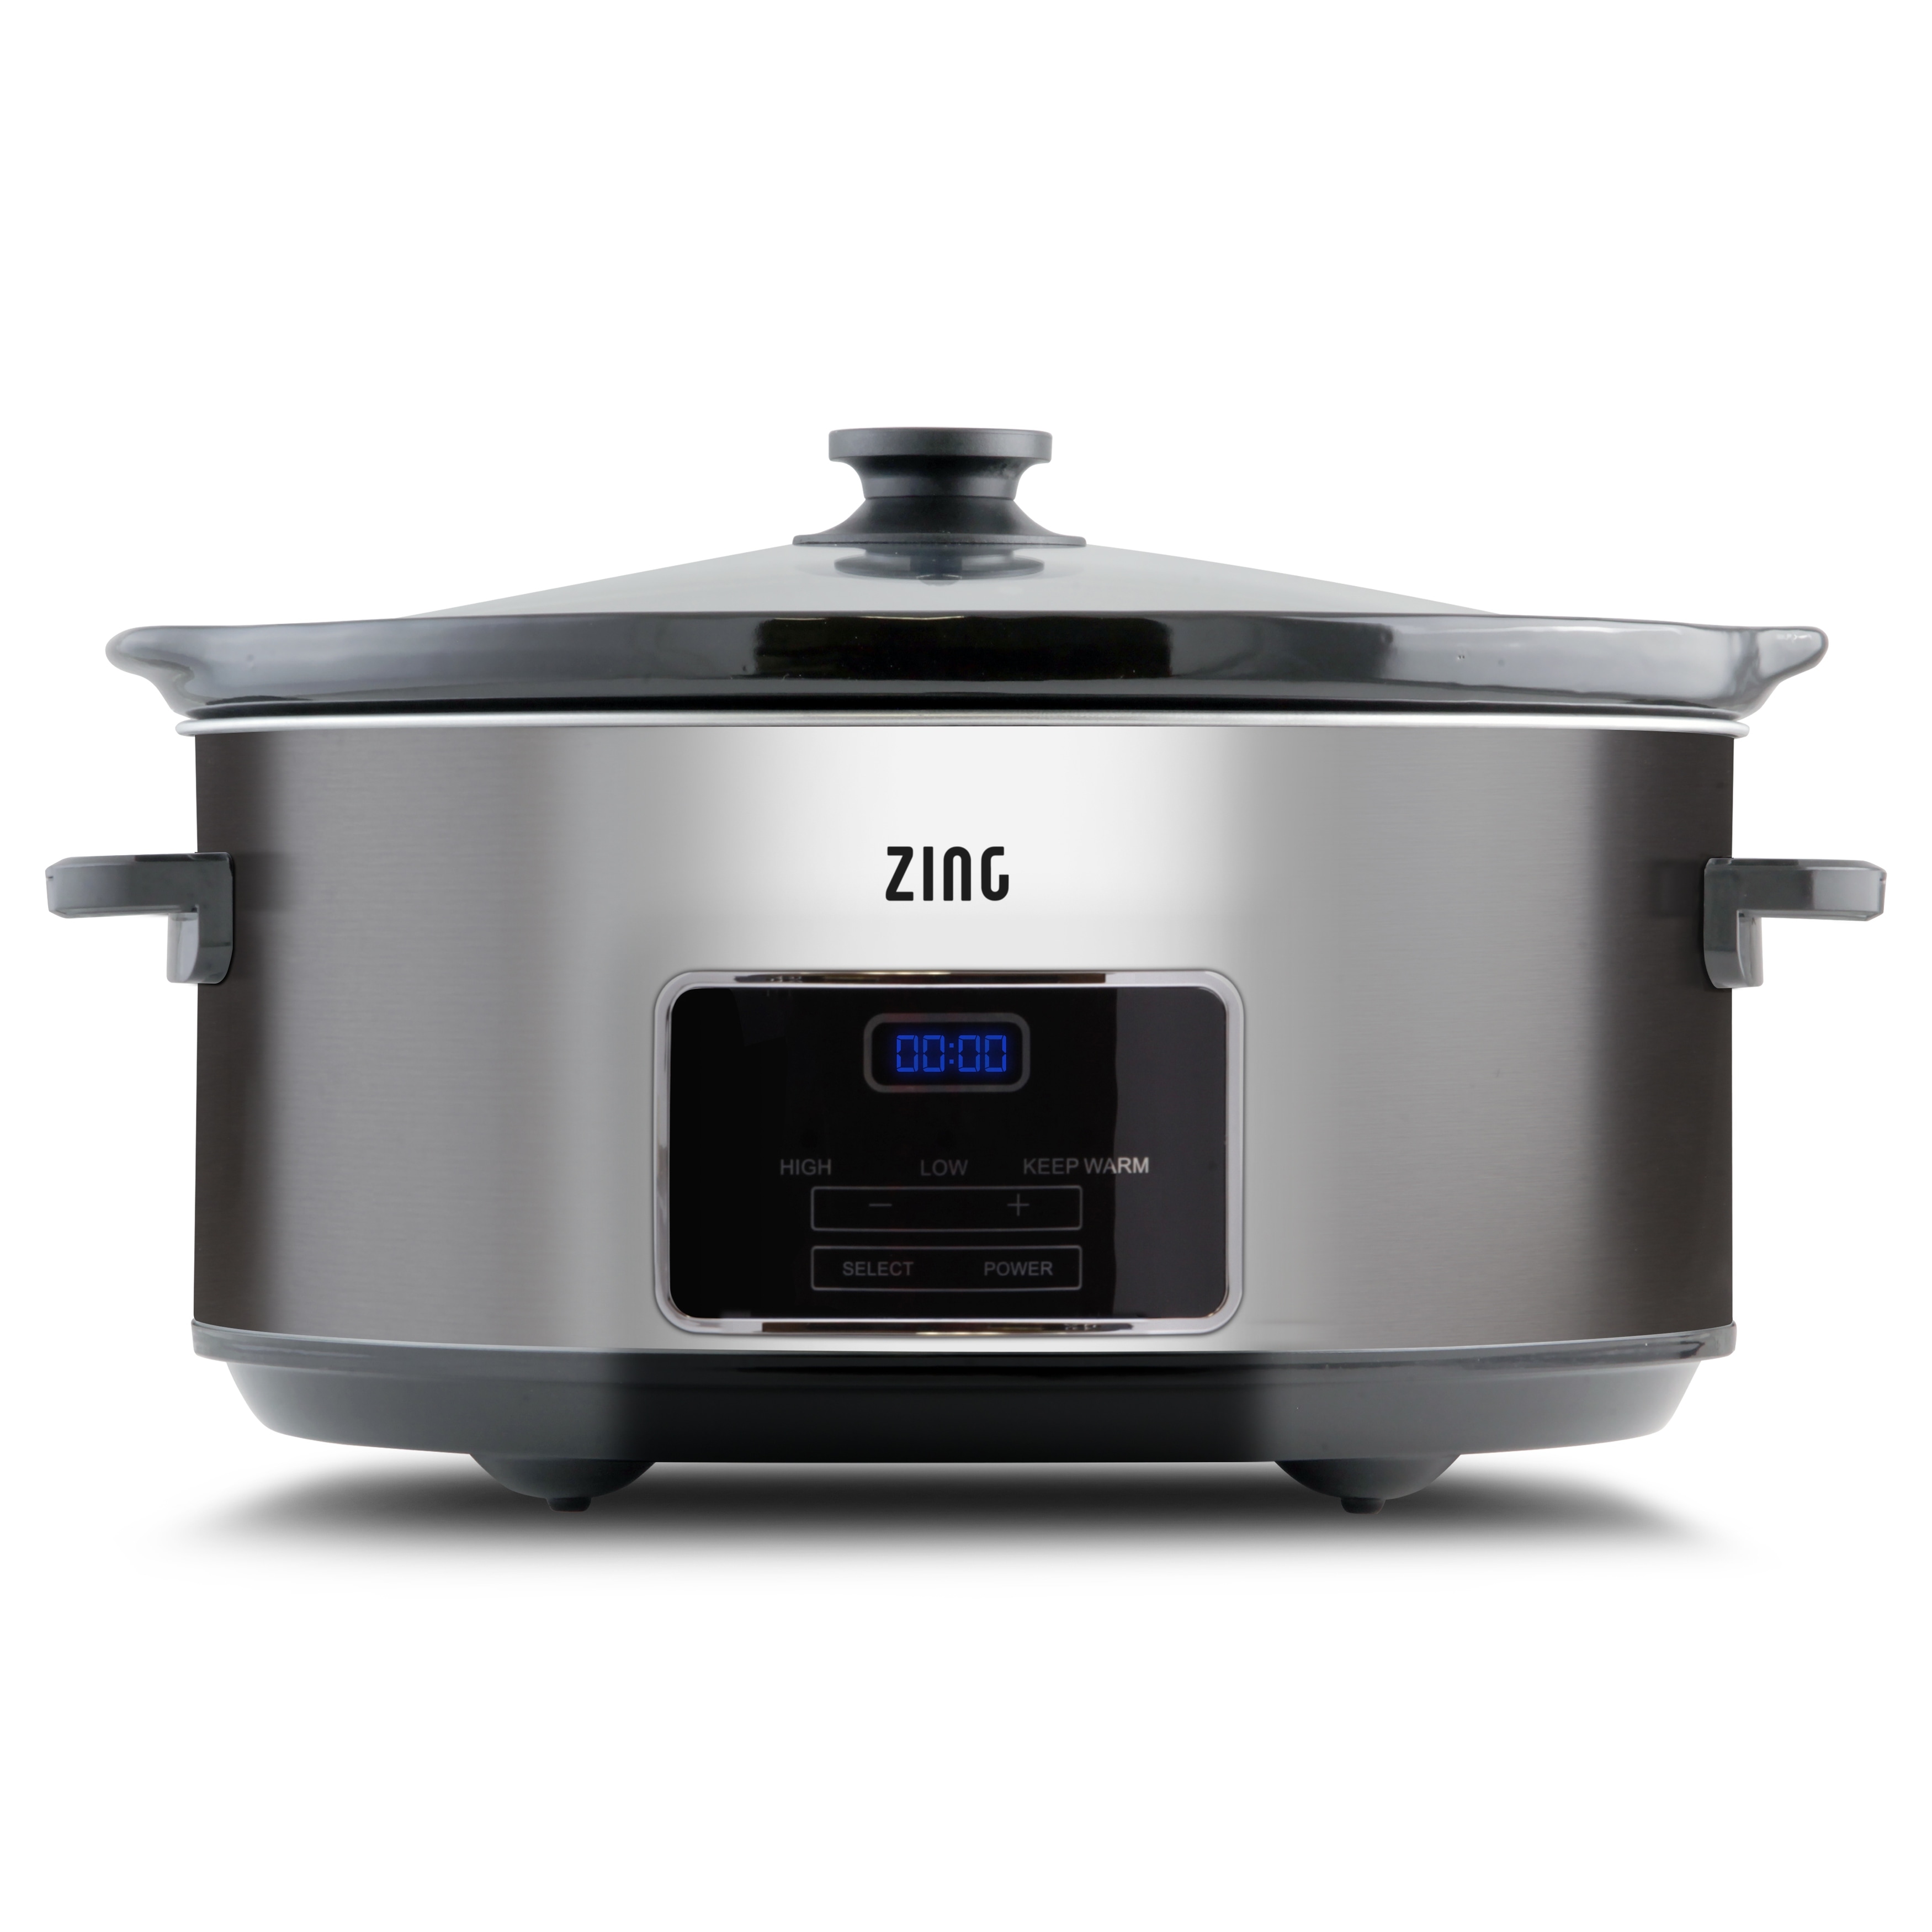 7-Quart Oval Stainless Steel Slow Cooker